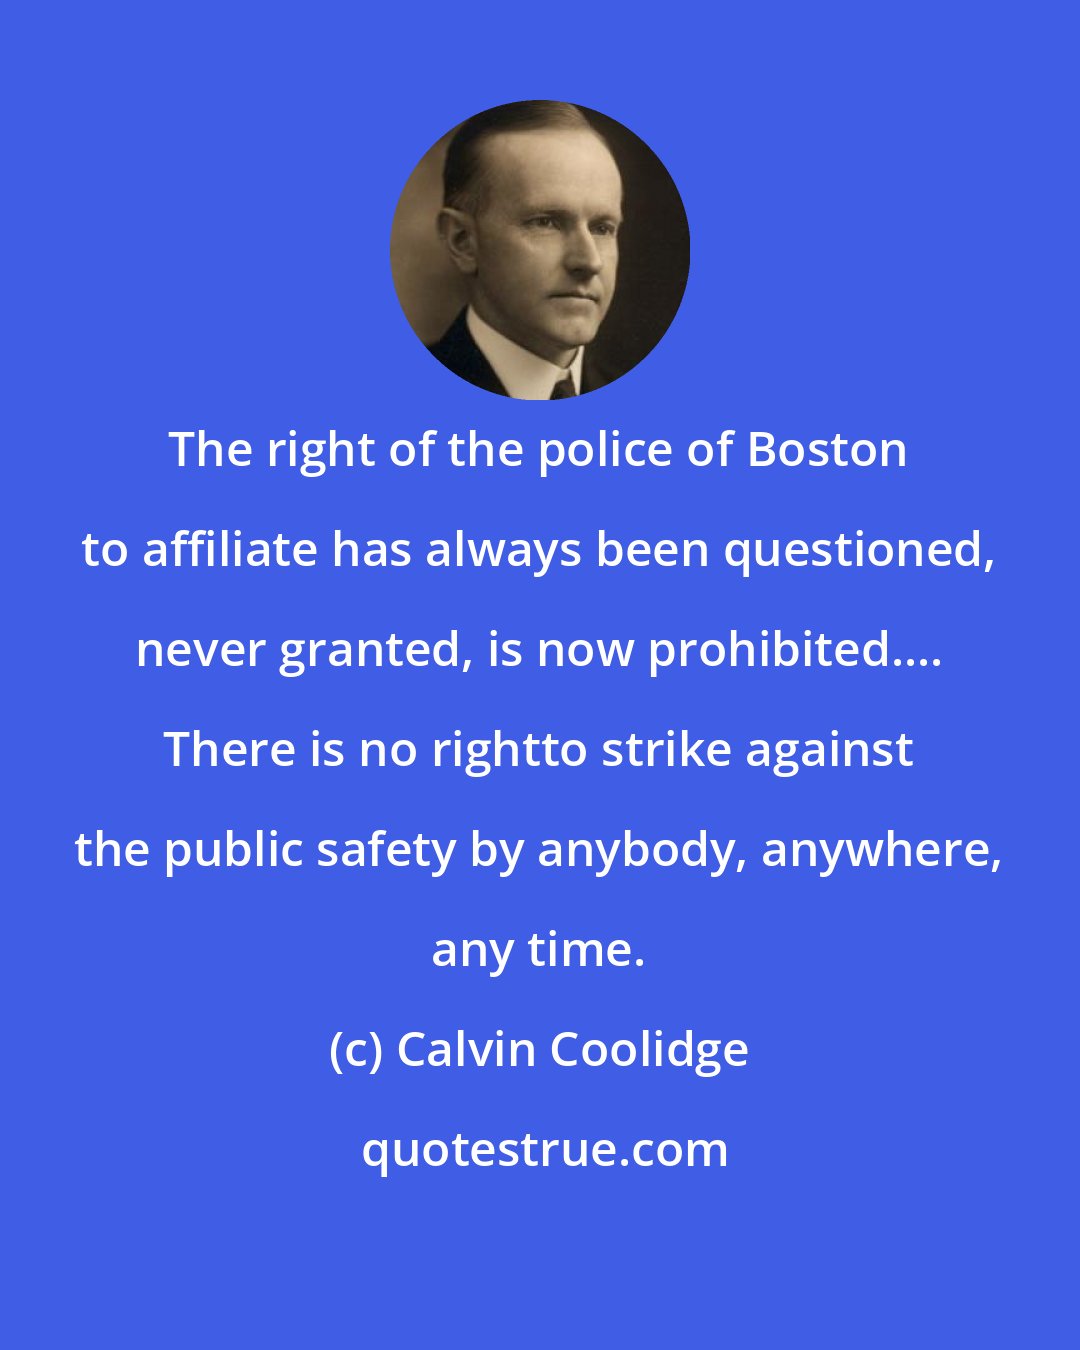 Calvin Coolidge: The right of the police of Boston to affiliate has always been questioned, never granted, is now prohibited.... There is no rightto strike against the public safety by anybody, anywhere, any time.